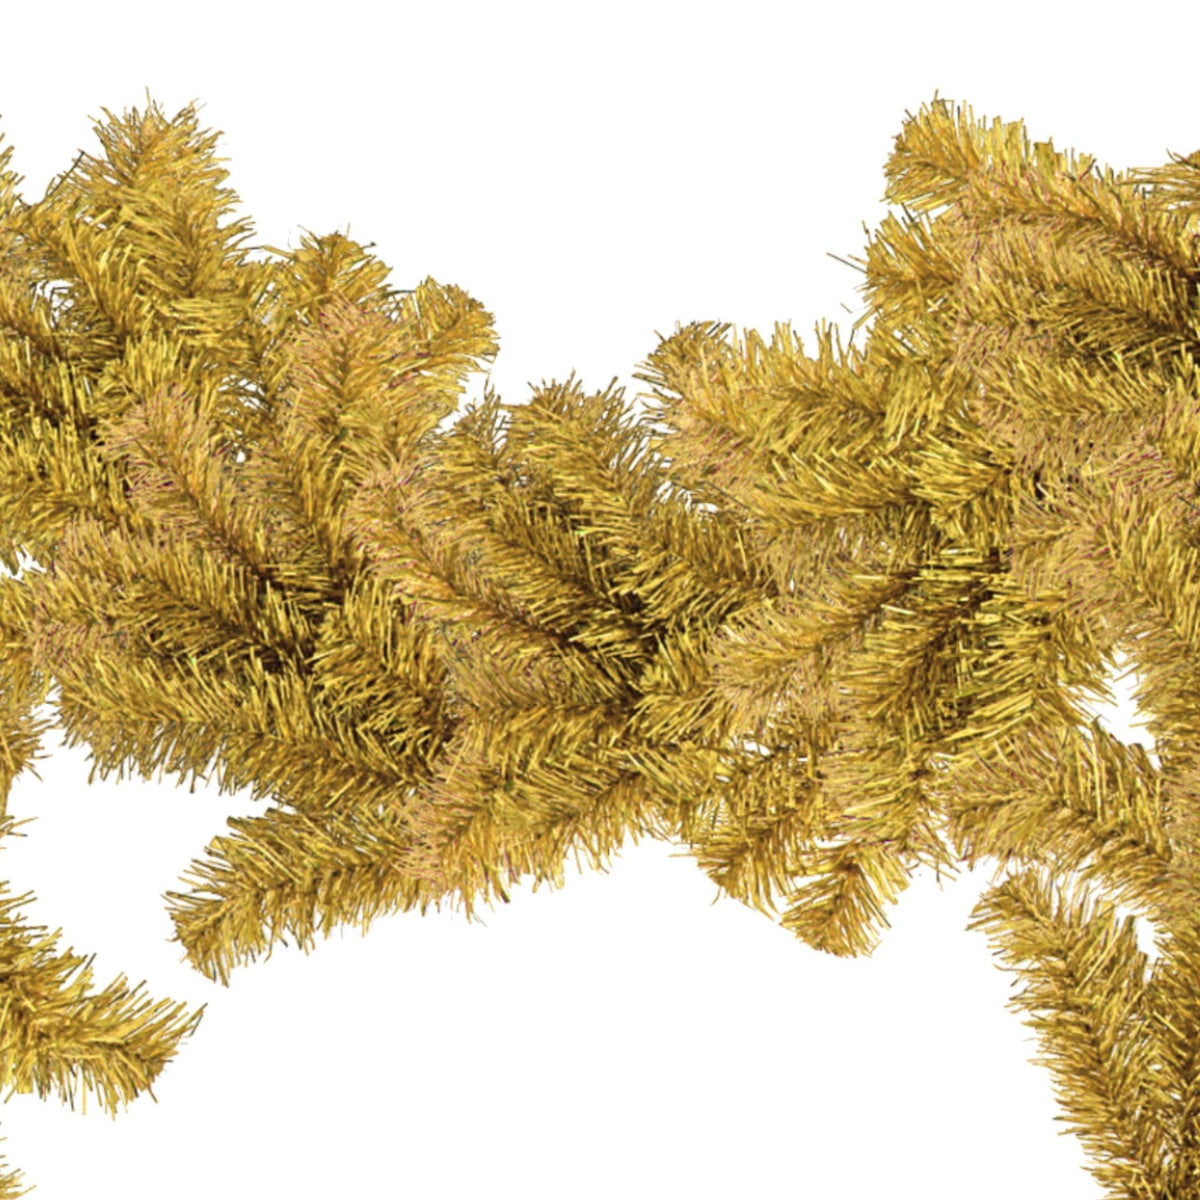 Shop for Lee Display's brand new 6FT Shiny Gold Tinsel Brush Garlands on sale at leedisplay.com.  Middle